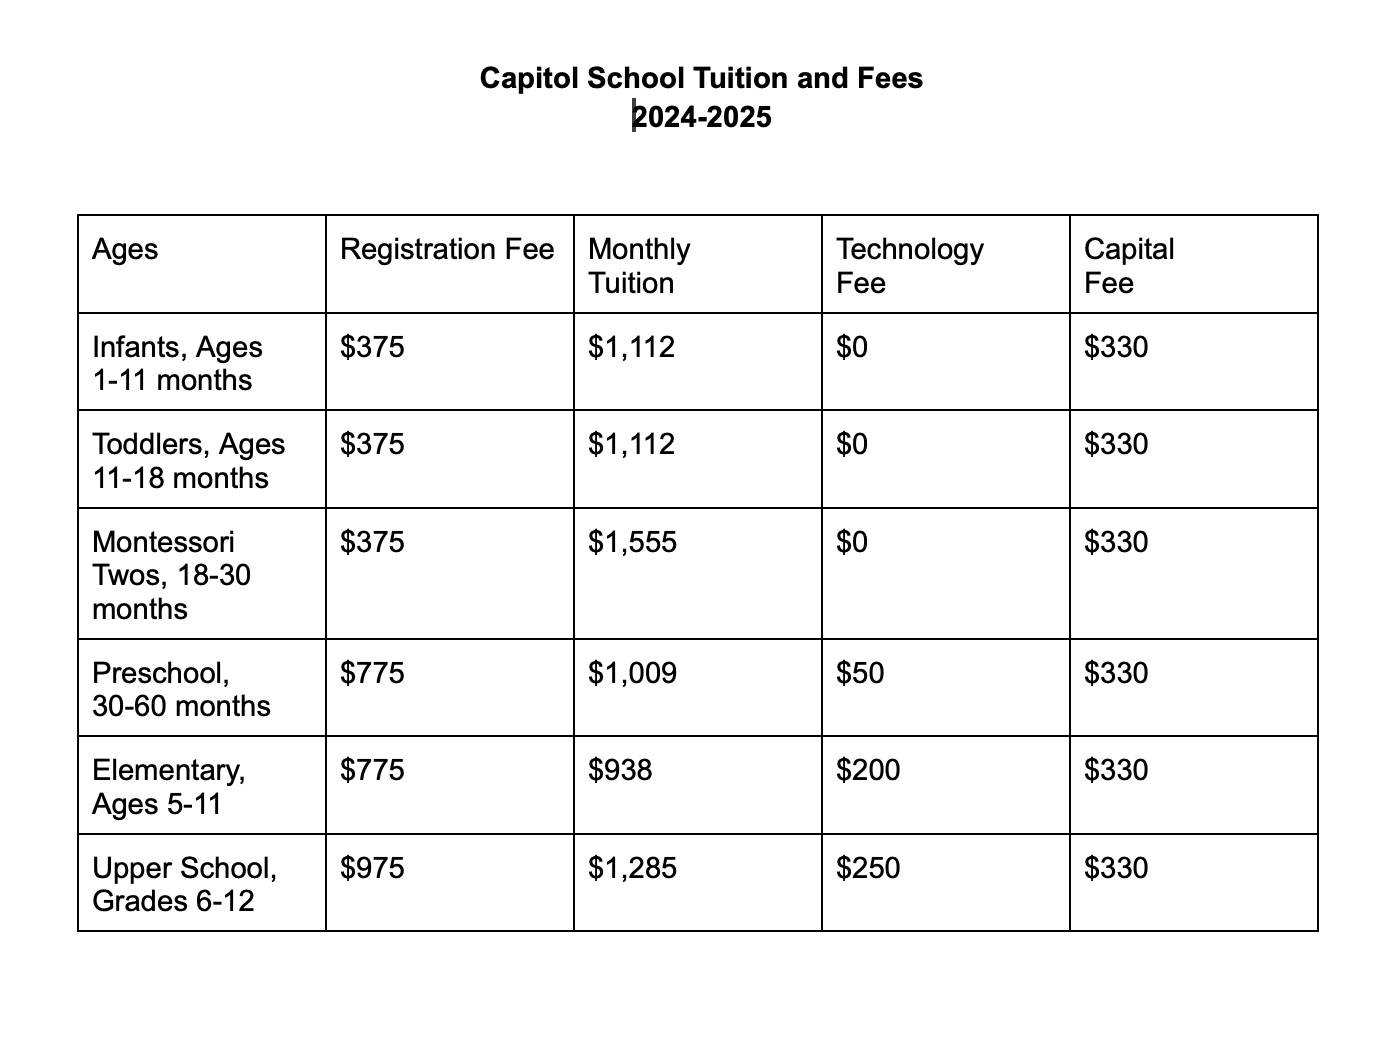 The Capitol School: Tuition 2024-2025